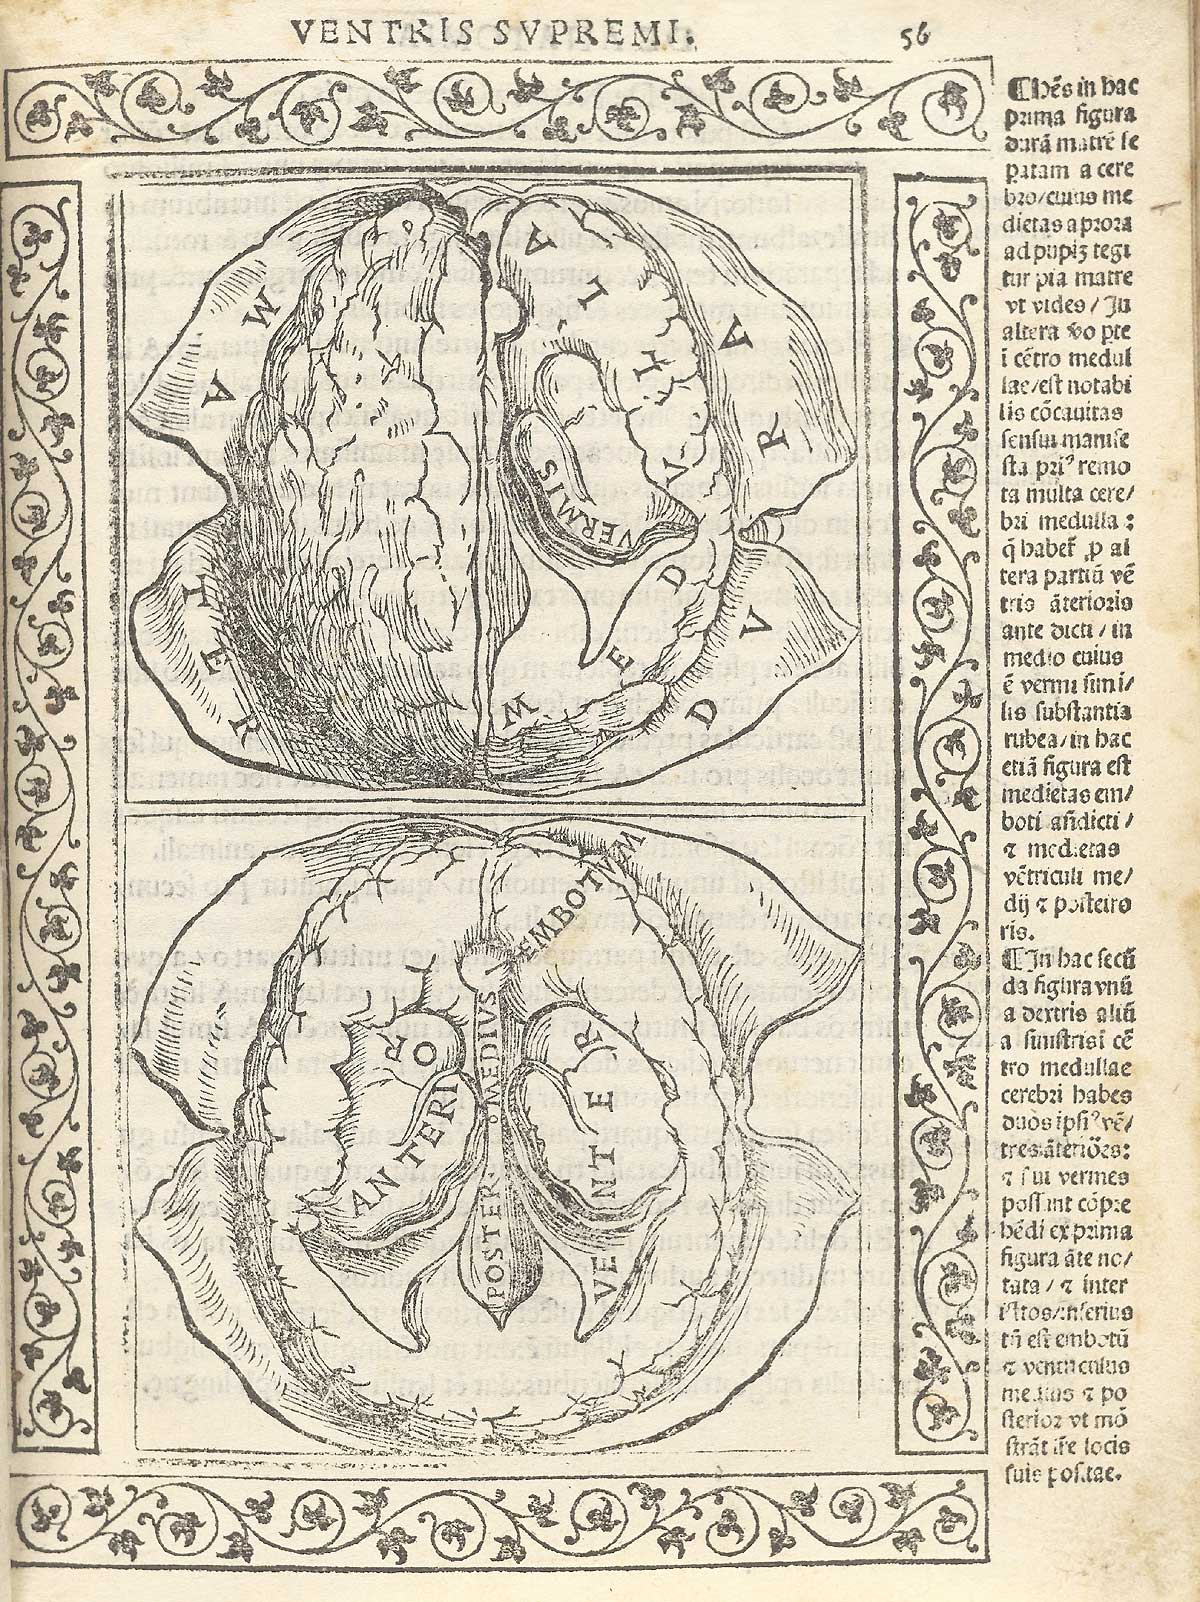 Two woodcuts (one above the other) showing dissections of the brain; the top figure showing the brain from above with dura mater open exposing the medulla; the lower figure showing the brain from below with ventricles exposed; with a woodcut border and text in Latin on the right side of page, from Berengario da Carpi’s Isagogae breues, Bologna, 1523, NLM Call no. WZ 240 B488i 1523.